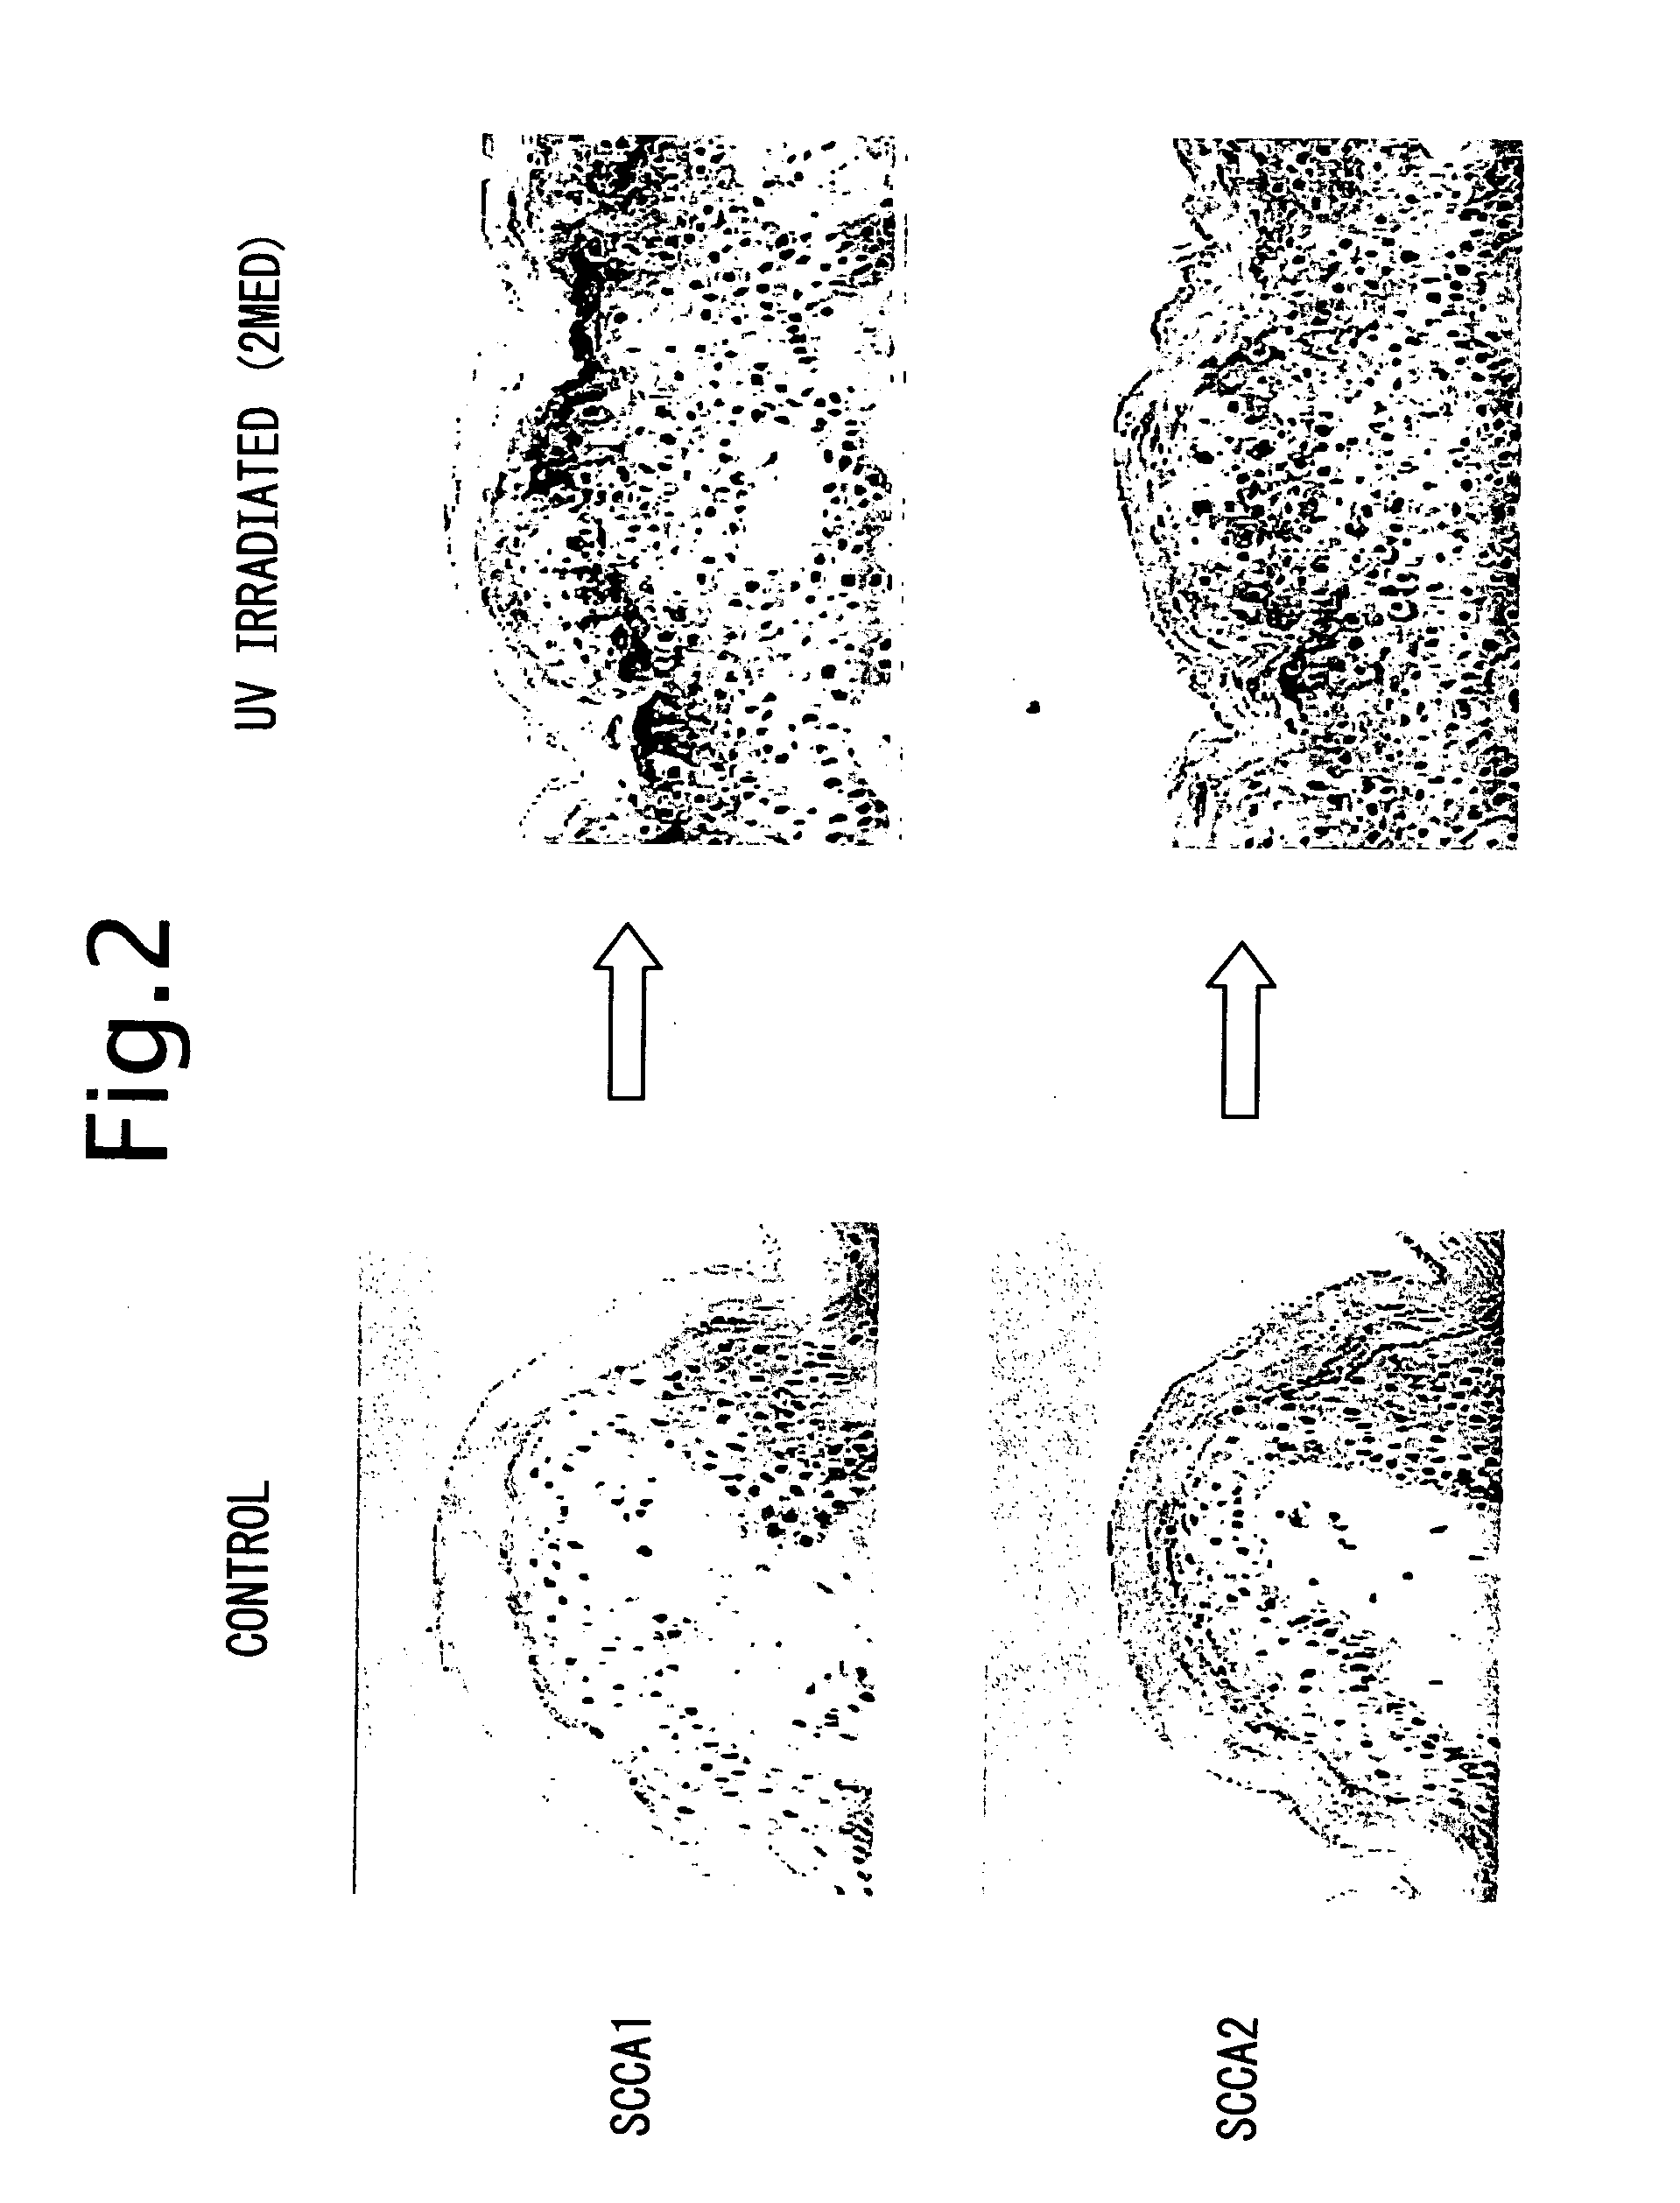 Method for inhibiting jnk-1 kinase activity by SCCA